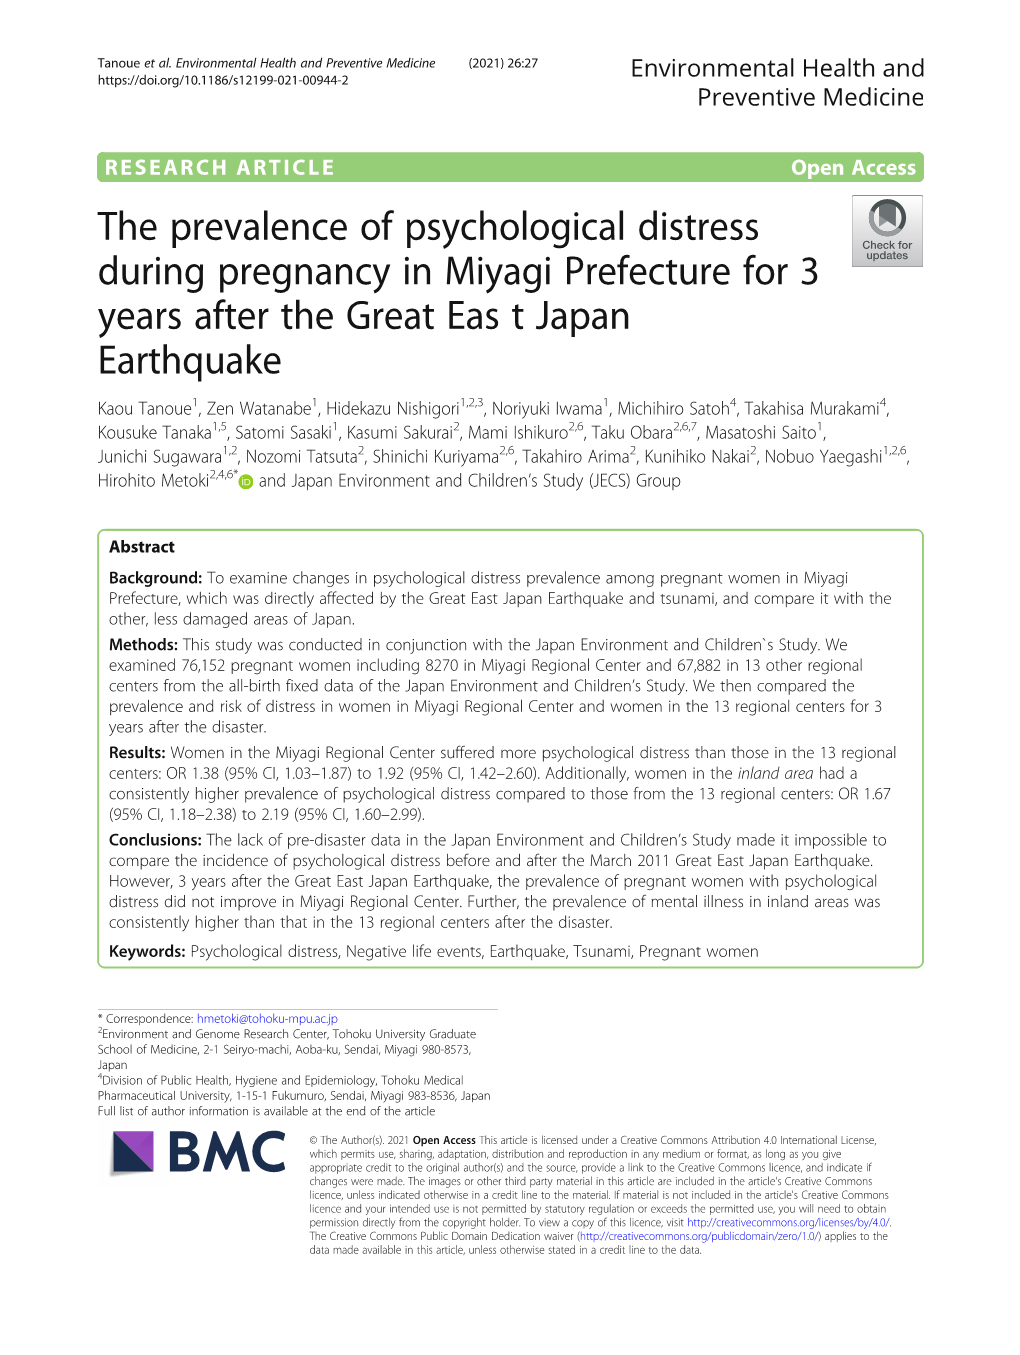 The Prevalence of Psychological Distress During Pregnancy in Miyagi